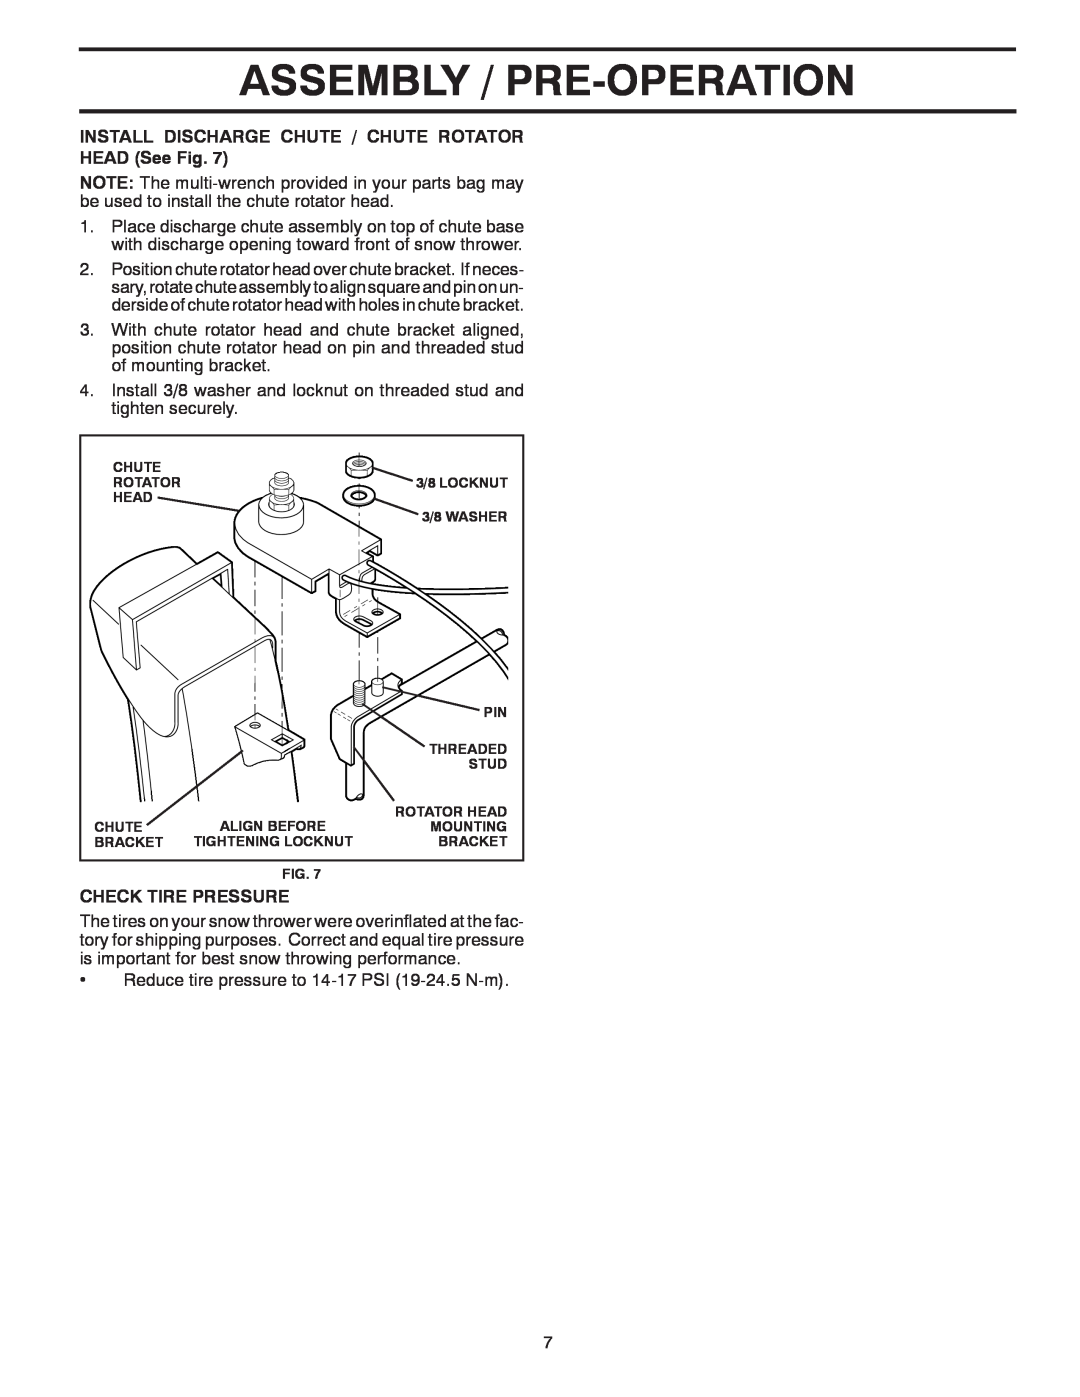 Poulan 418971 Assembly / Pre-Operation, INSTALL DISCHARGE CHUTE / CHUTE ROTATOR HEAD See Fig, Check Tire Pressure 